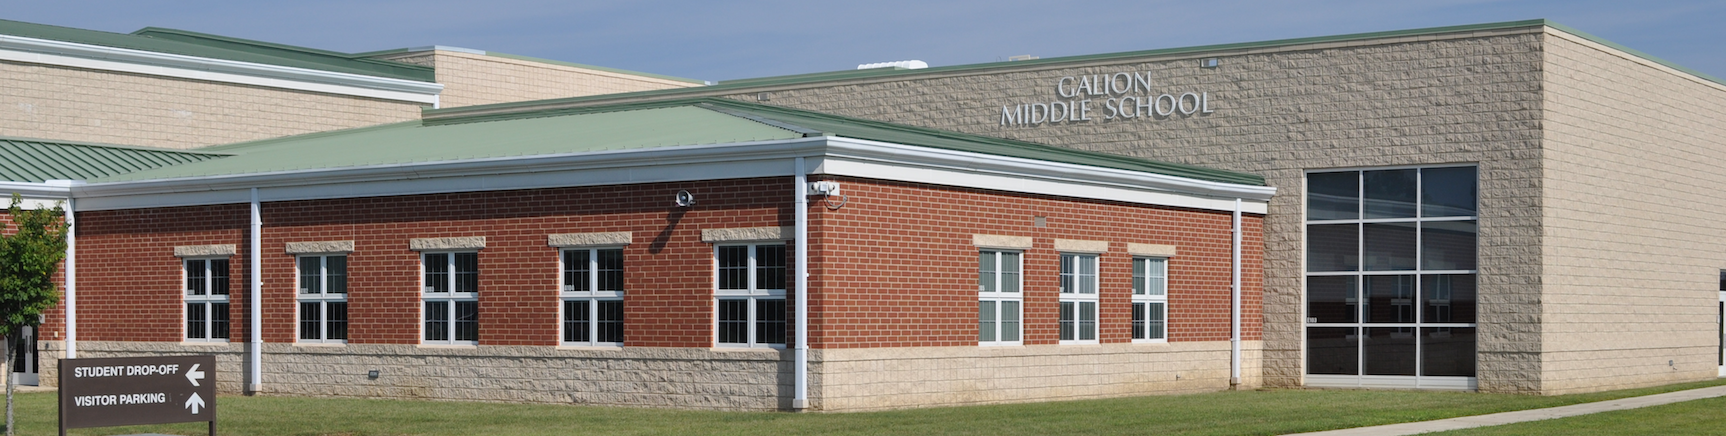 galion middle school